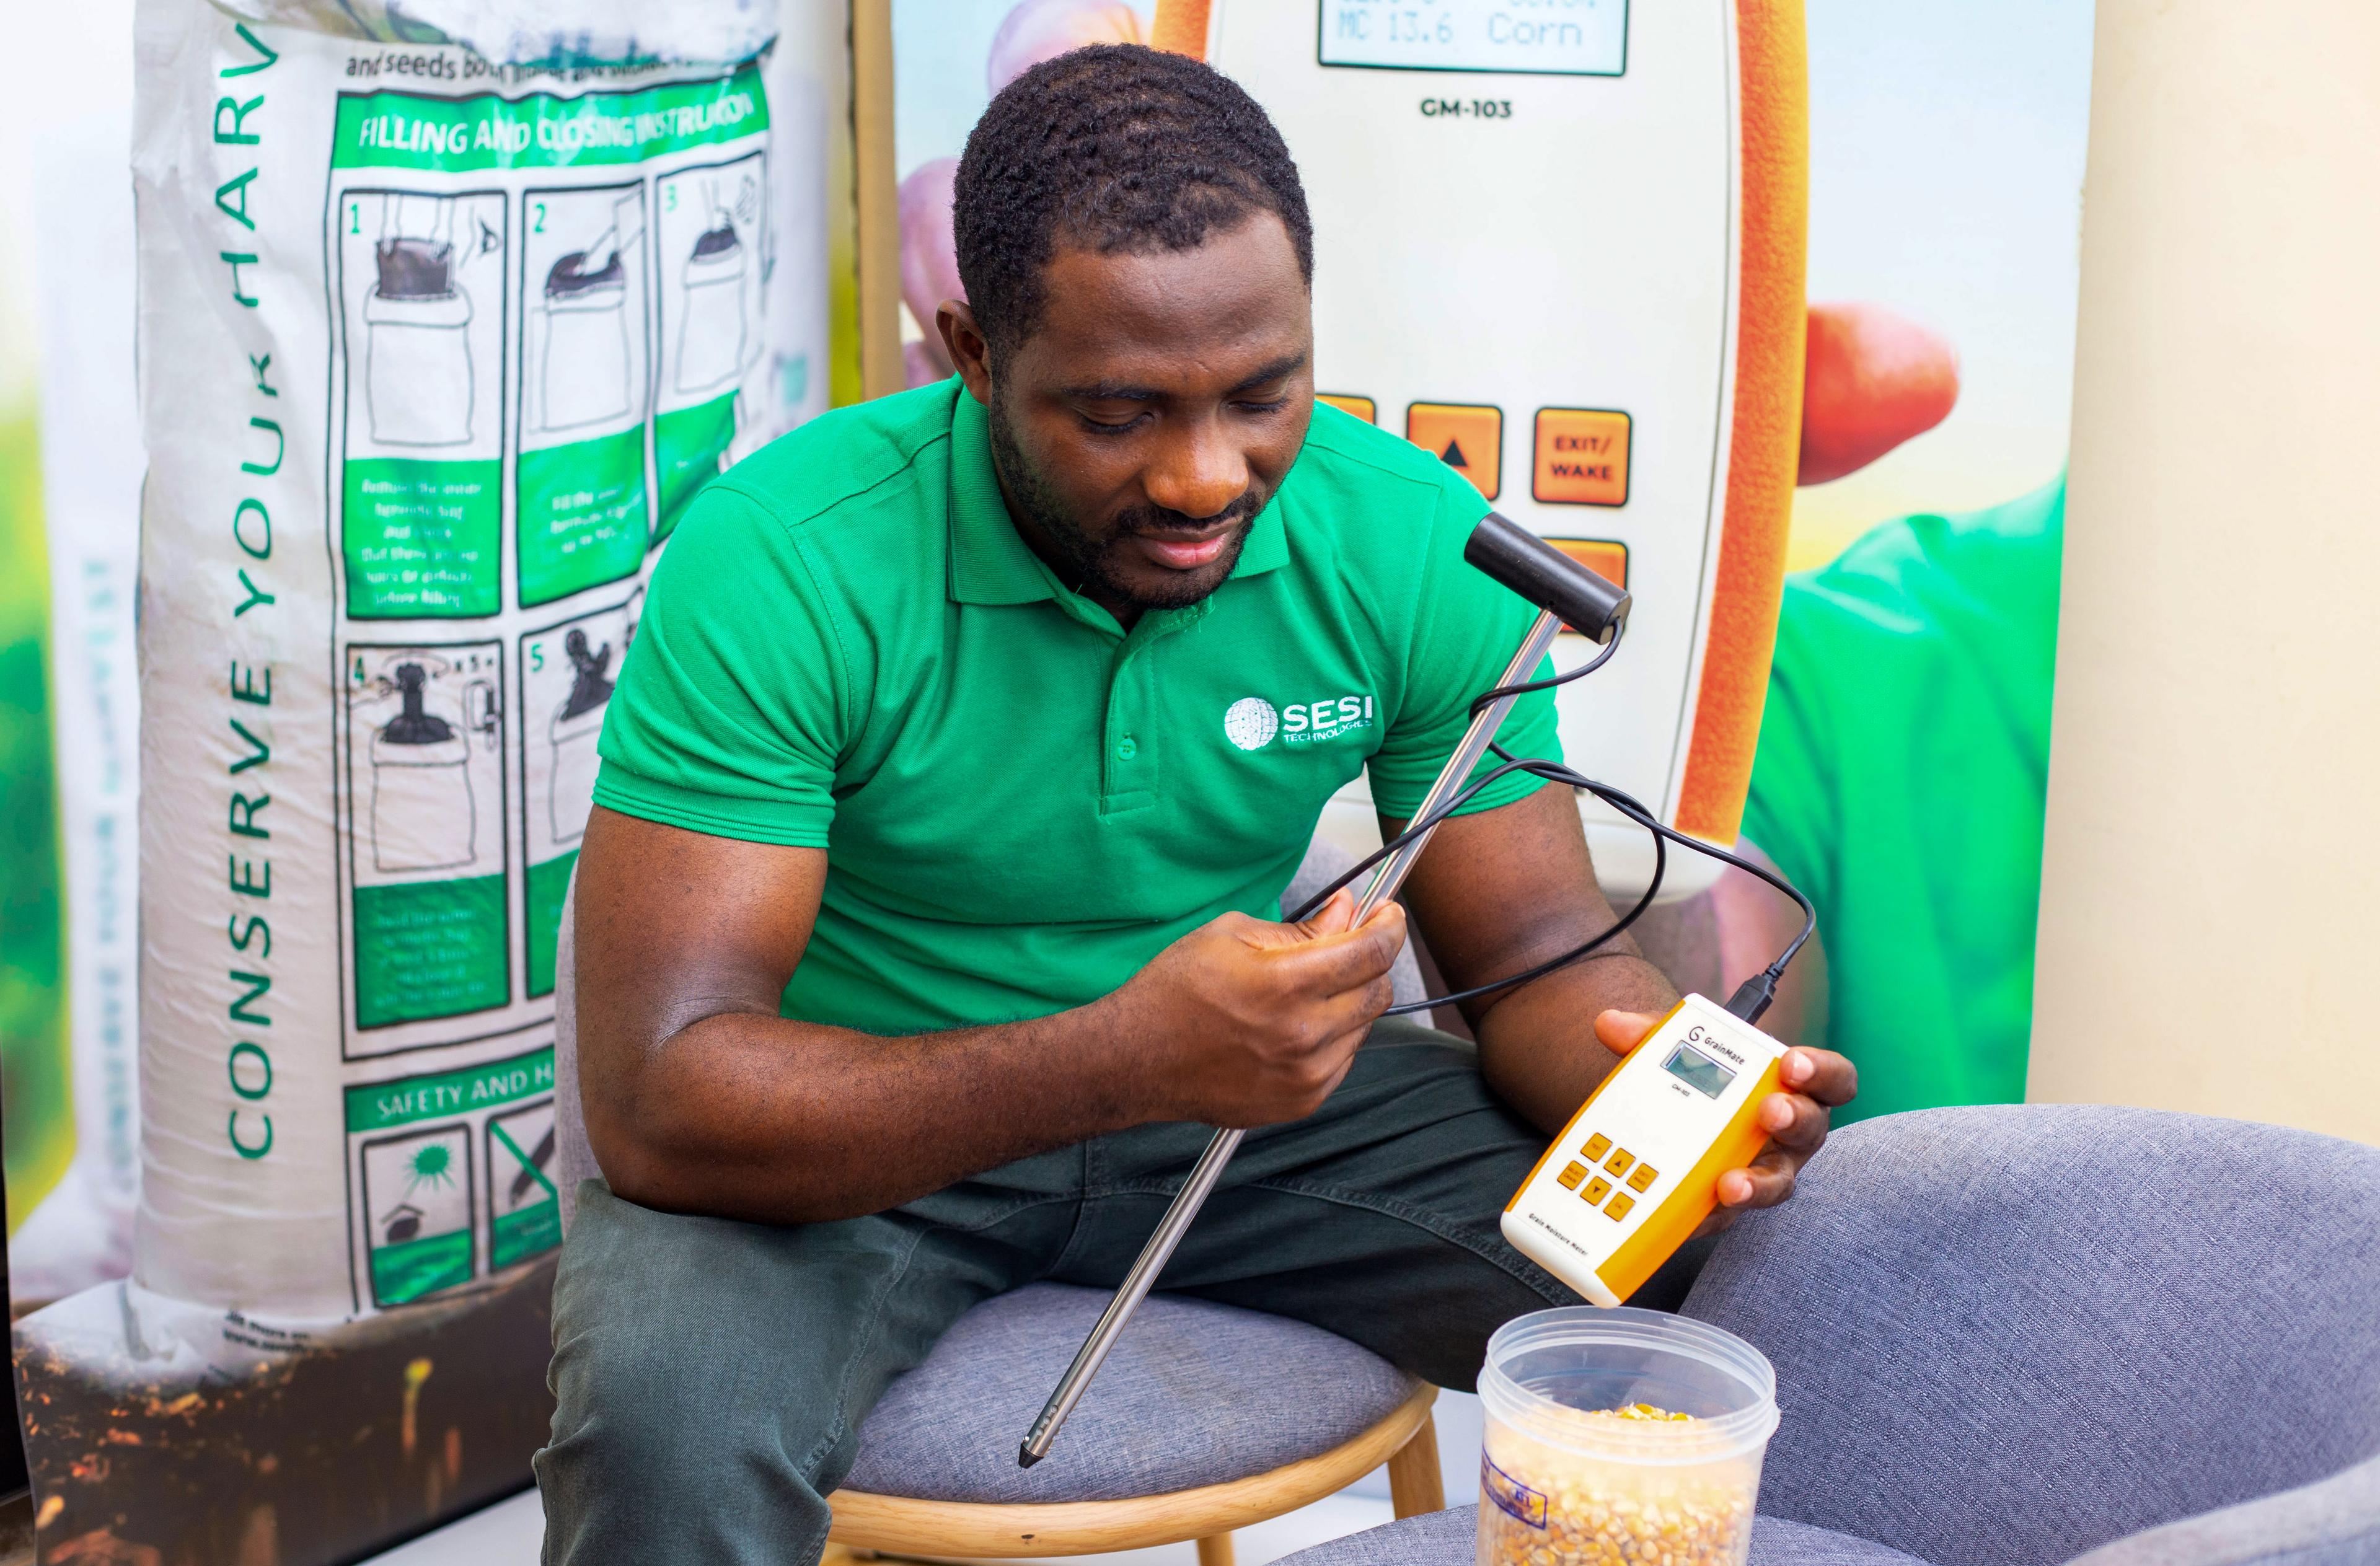 This young innovator's moisture reader saves farmers from food losses. Now he wants to scale to improve Africa's food security.